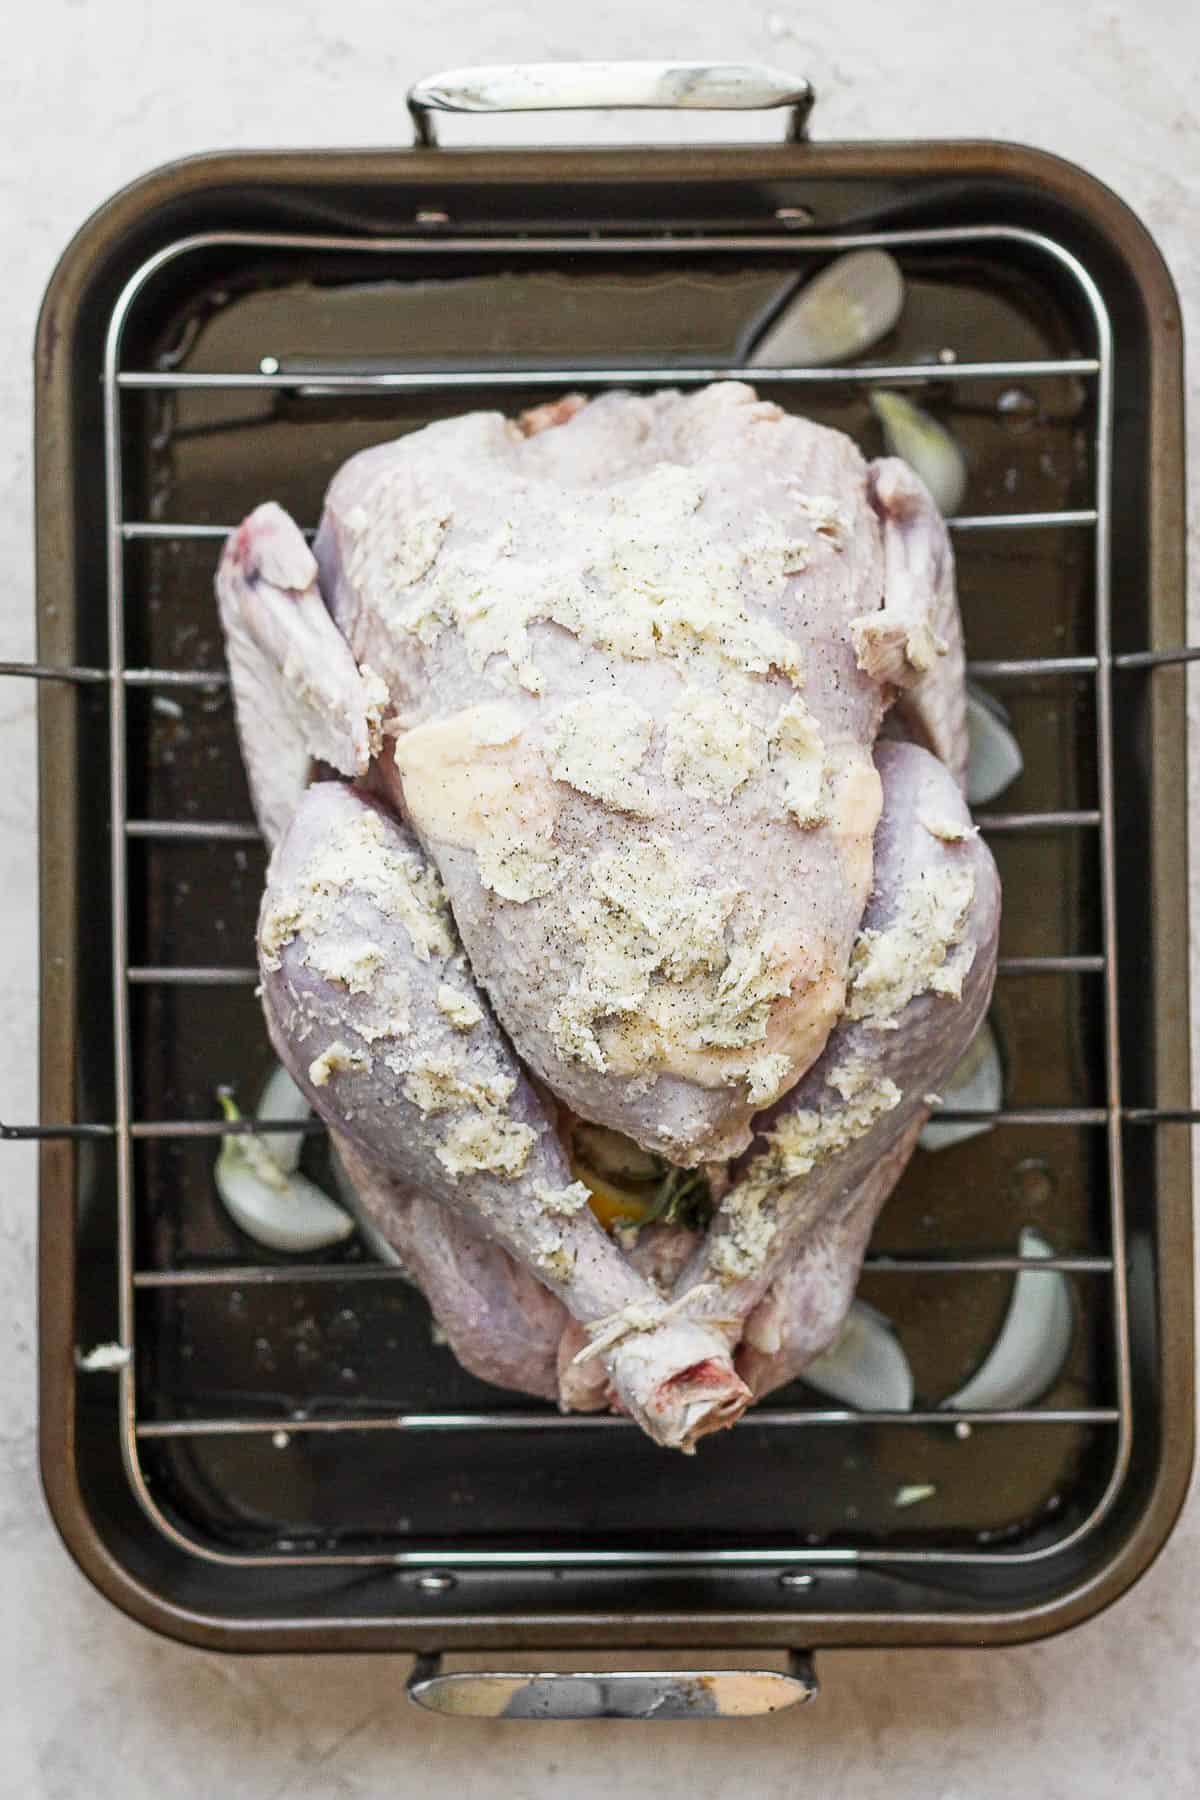 The turkey placed on the roasting rack and it has been covered in herbed butter.